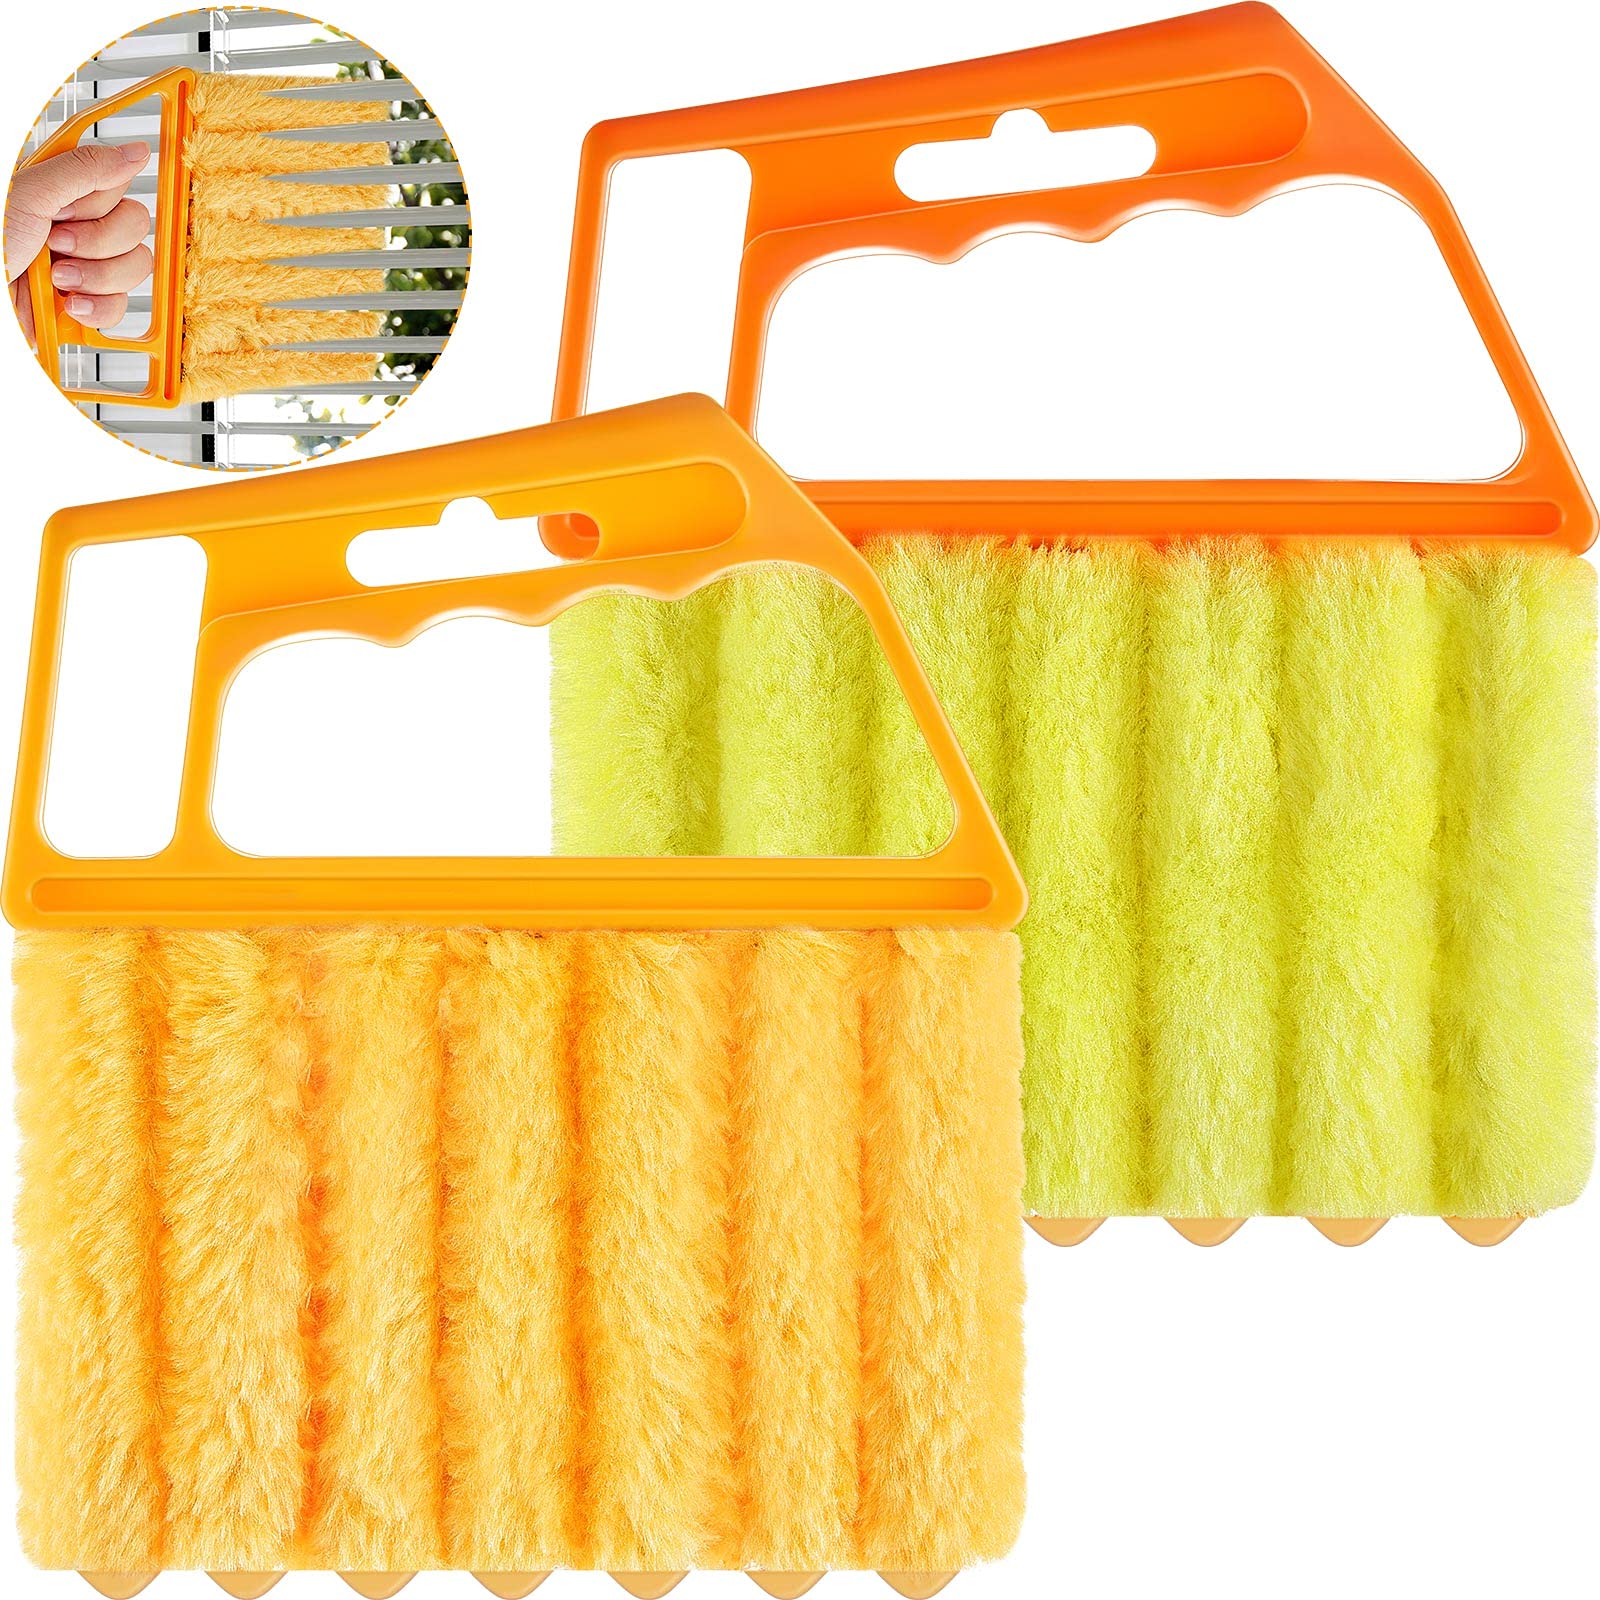 Blind Cleaner Duster Tool, 7 Finger Dusting Cleaner Tool for Window  Venetian, Washable Mini Cleaner Brush, Hand held Cleaner Tool for Air  Conditioner Wood Blinds Dust Dirt (2 Colors, 2 Pieces) Orange,yellow 2